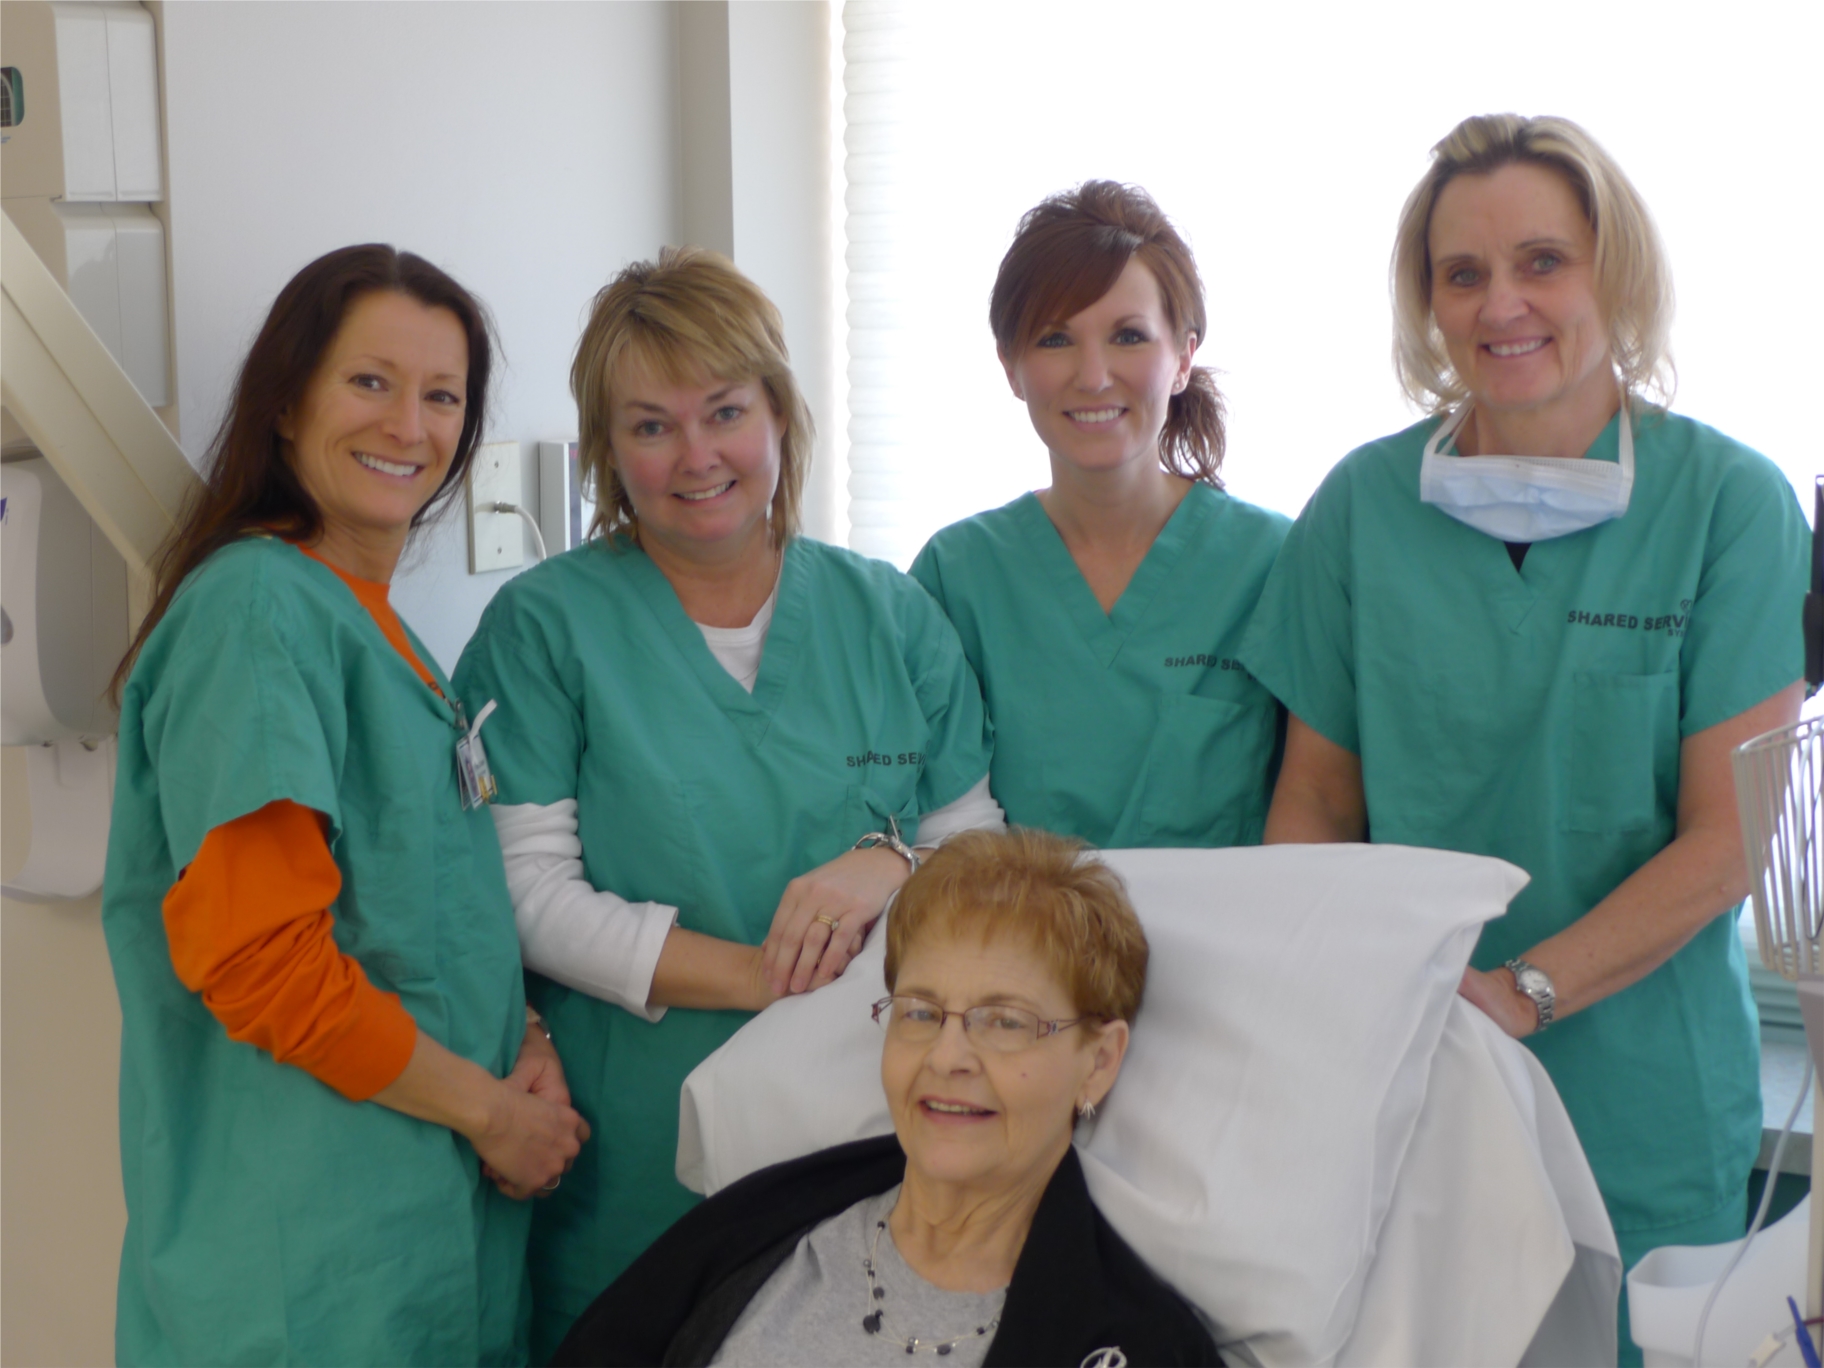 Dialysis Staff meet the complex needs of patients as they undergo treatment